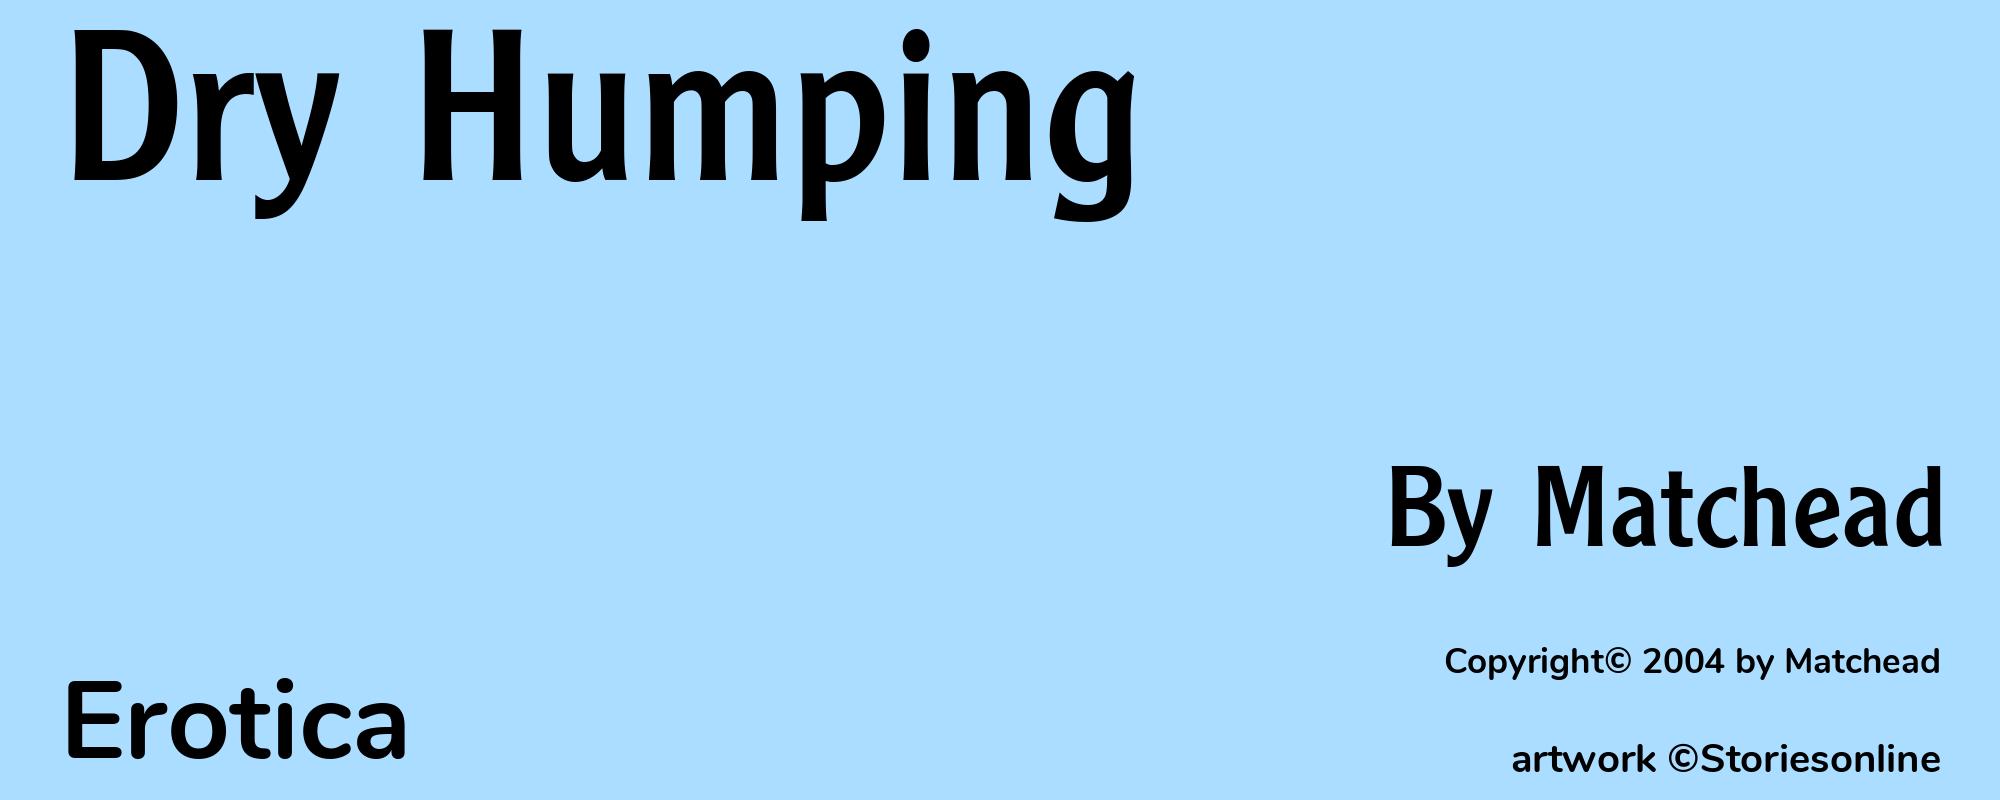 Dry Humping - Cover